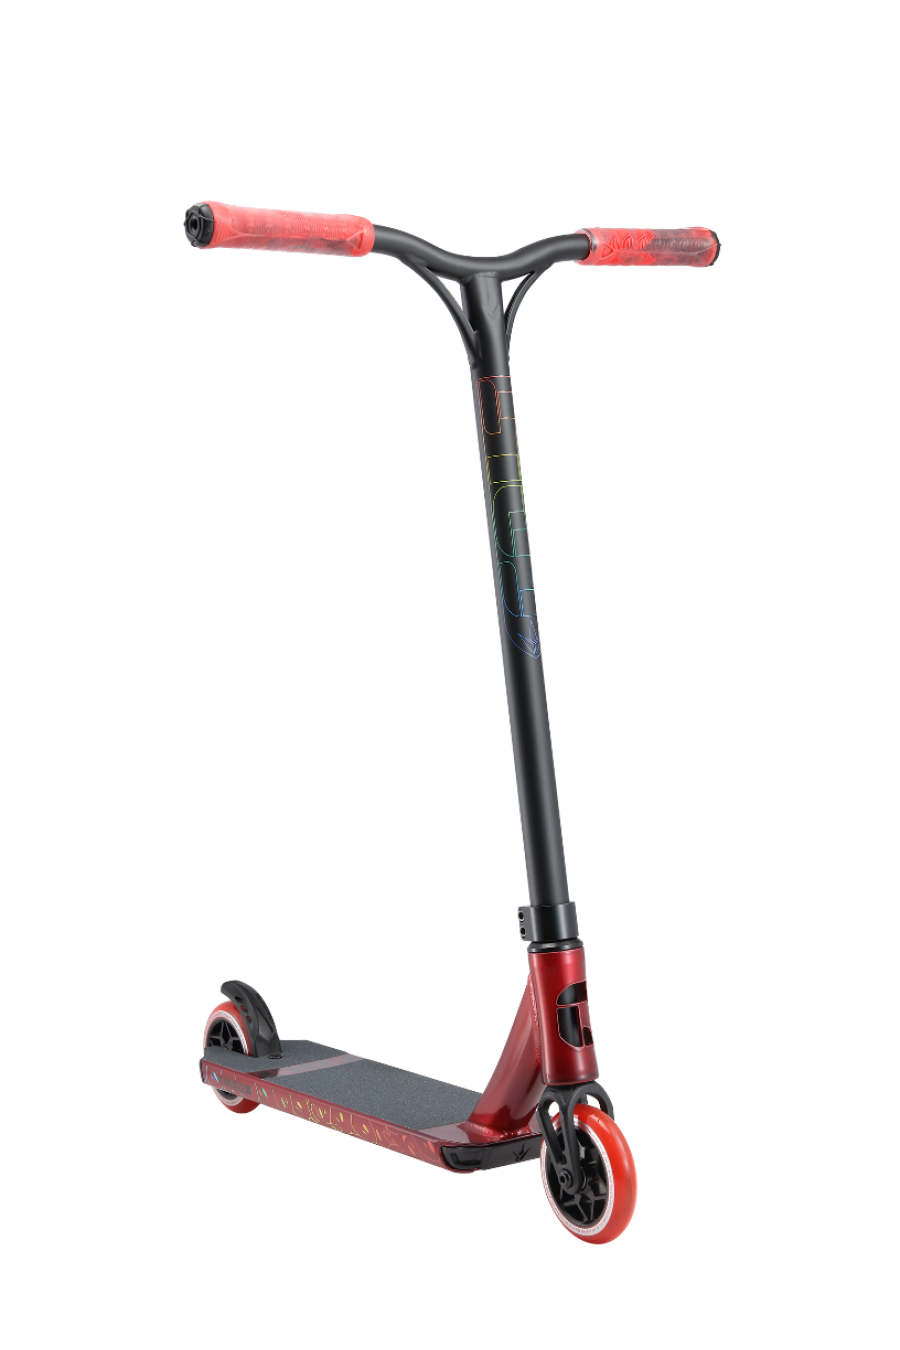 Envy Colt S5 Complete Scooter - Red